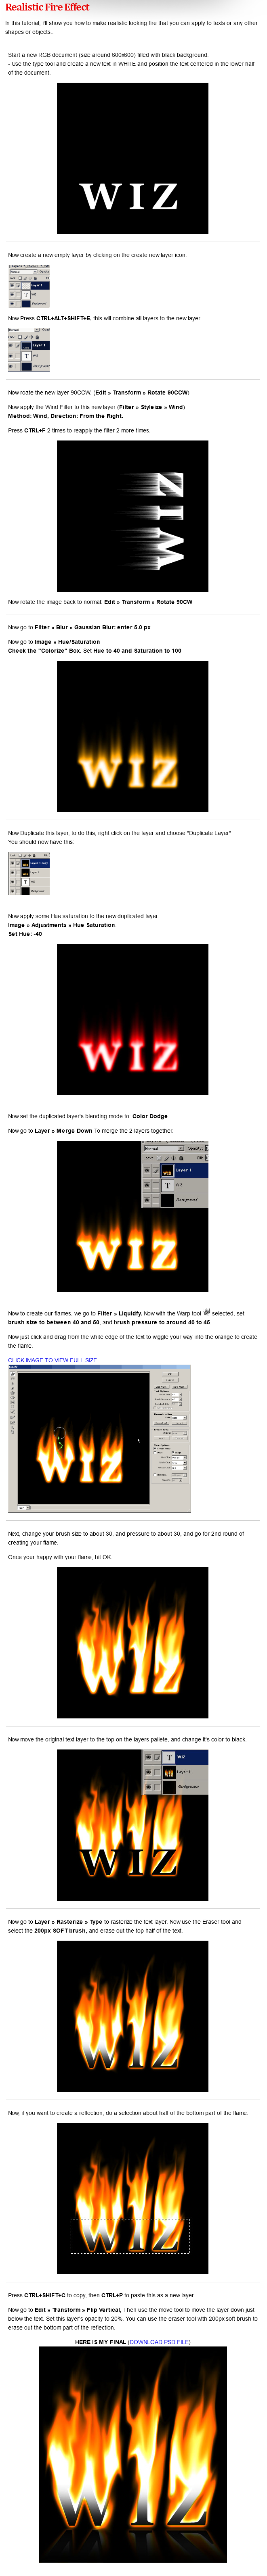 http://tutorials.aftab.cc/photoshop/fire_effect.png